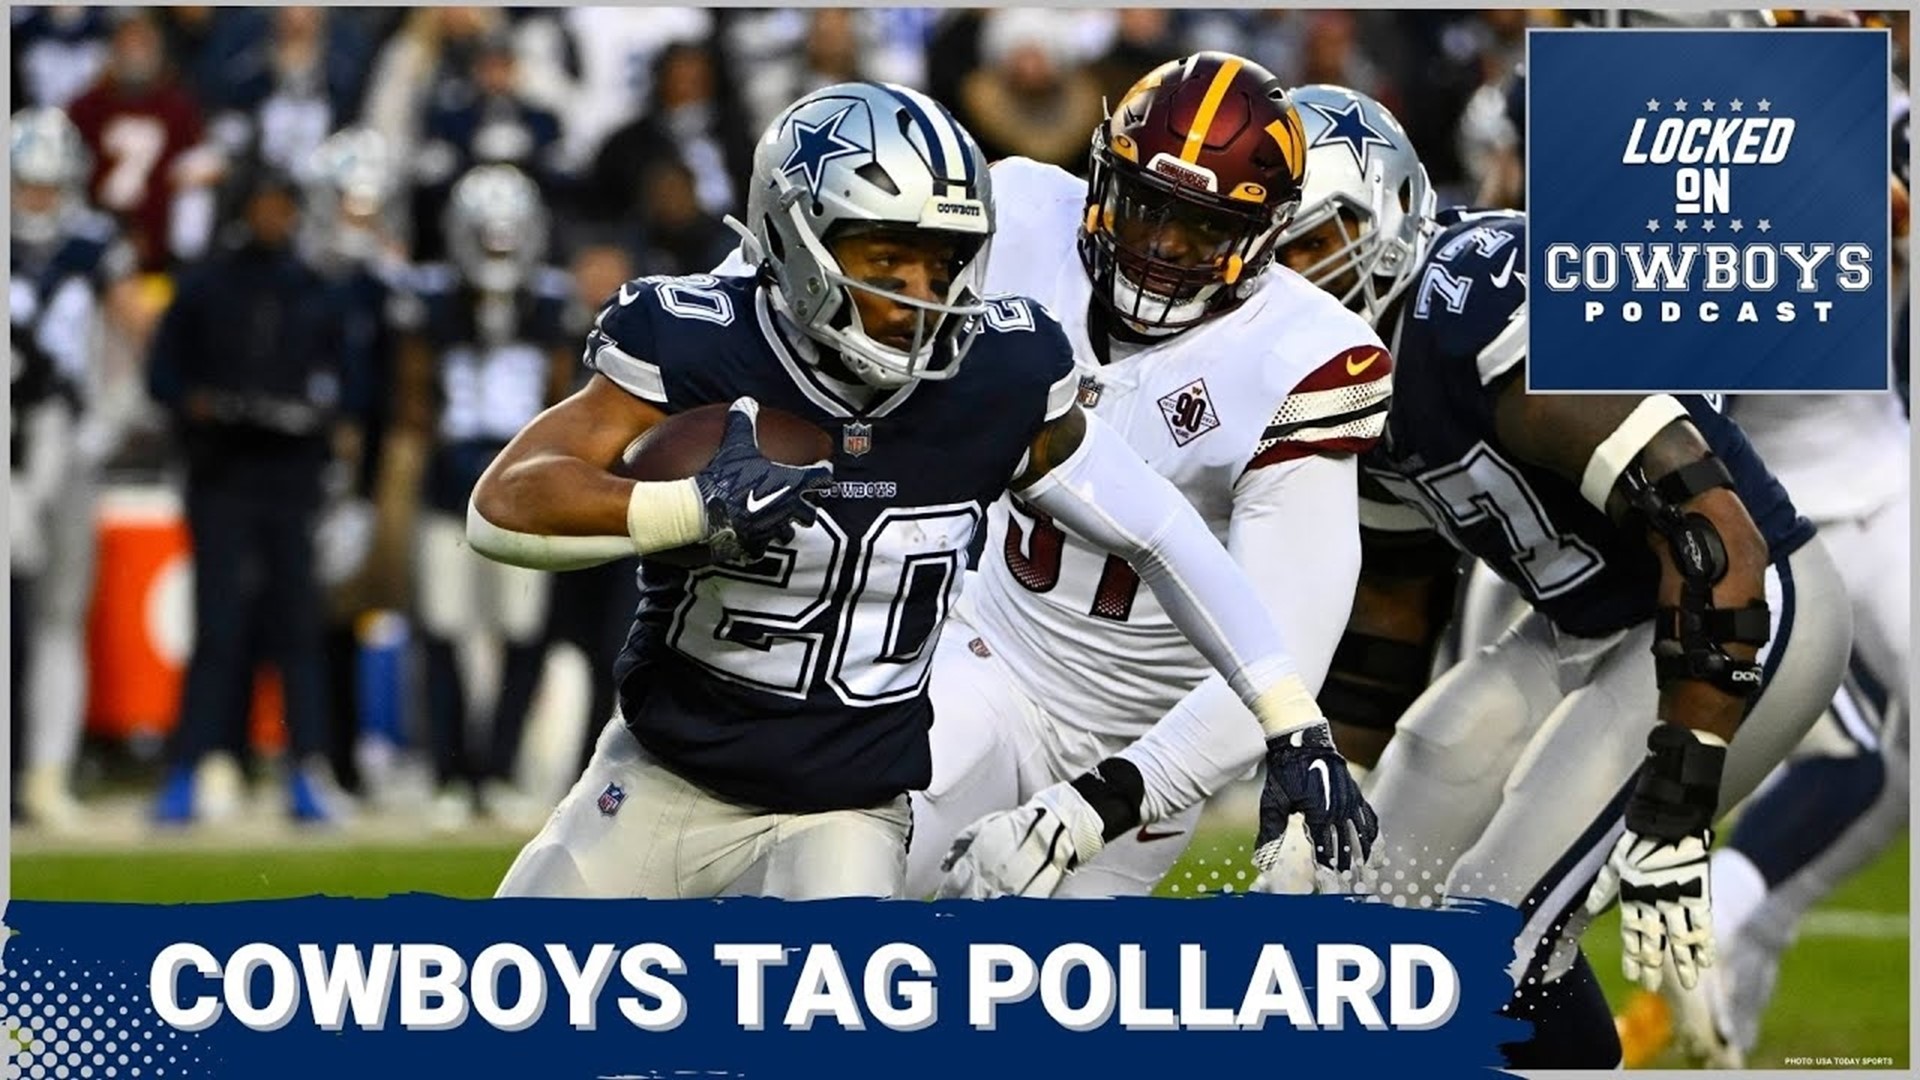 Marcus Mosher and Landon McCool discuss Tony Pollard getting the franchise tag by the Dallas Cowboys. Plus, other NFL Combine thoughts!